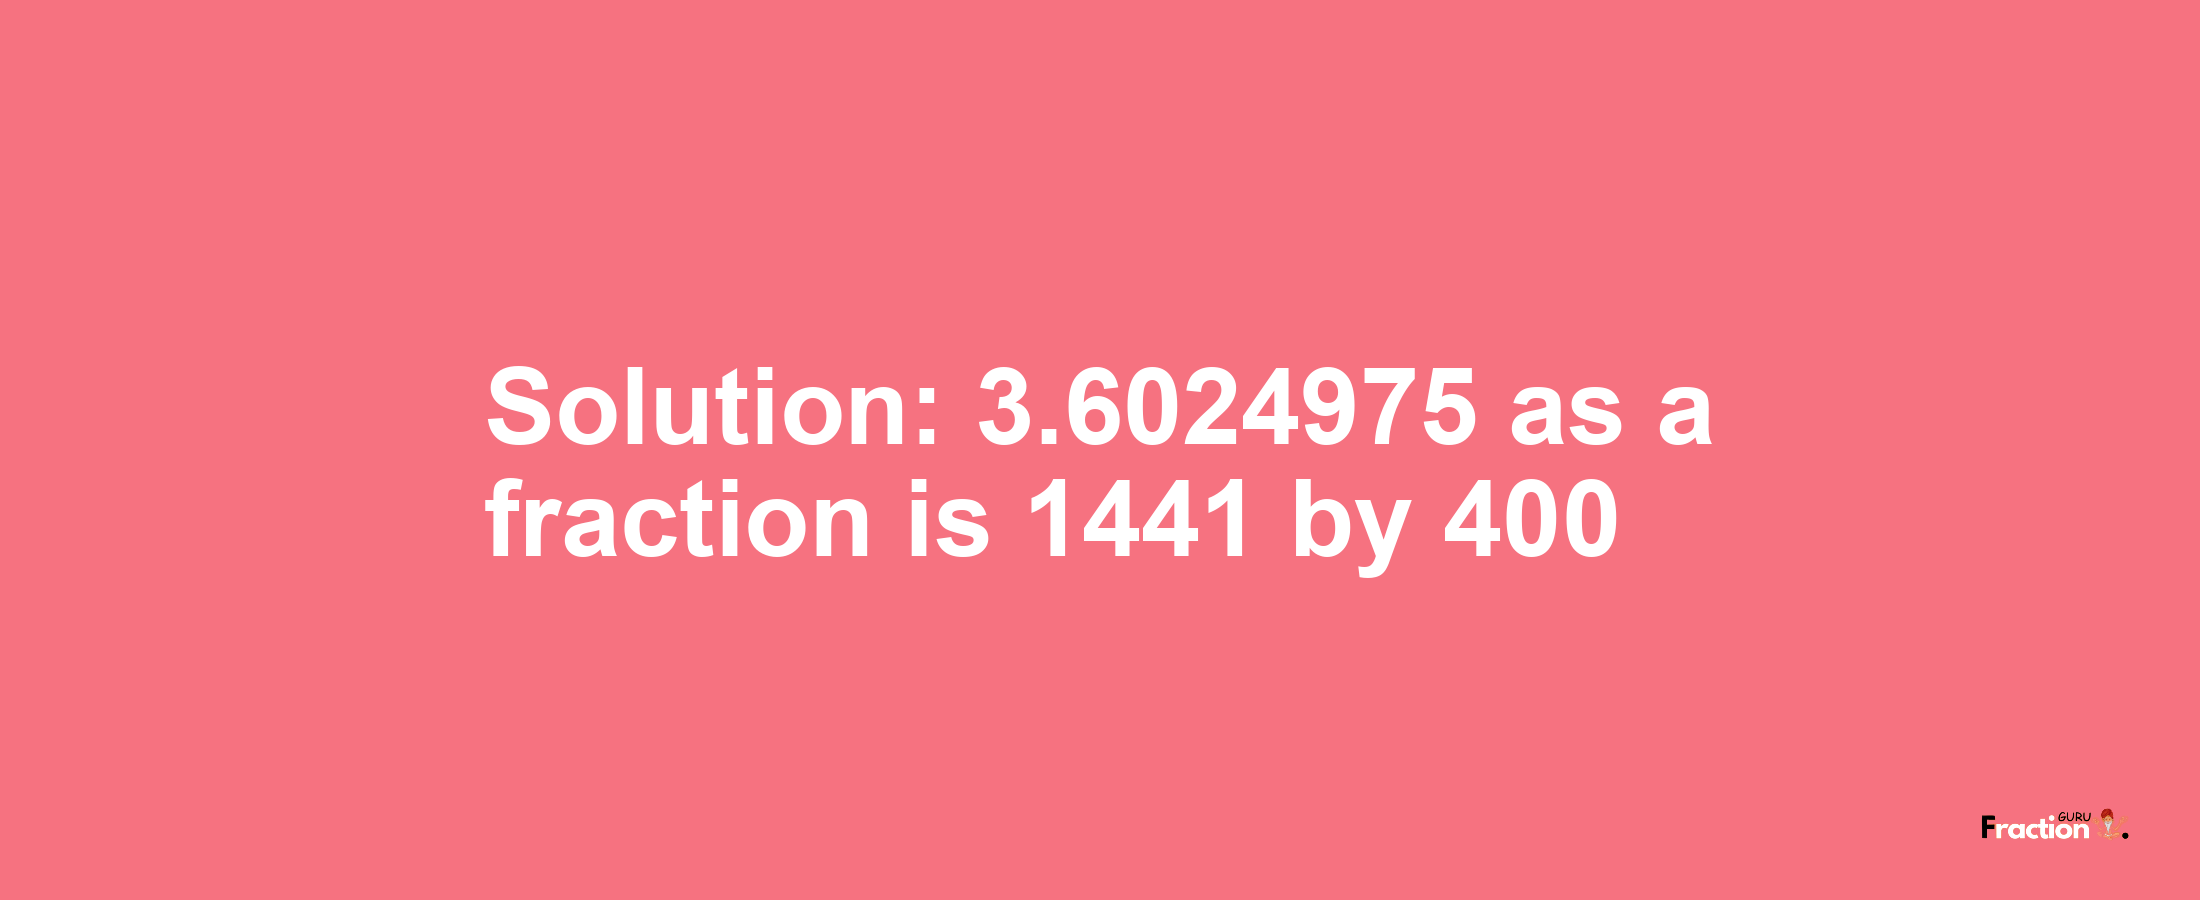 Solution:3.6024975 as a fraction is 1441/400